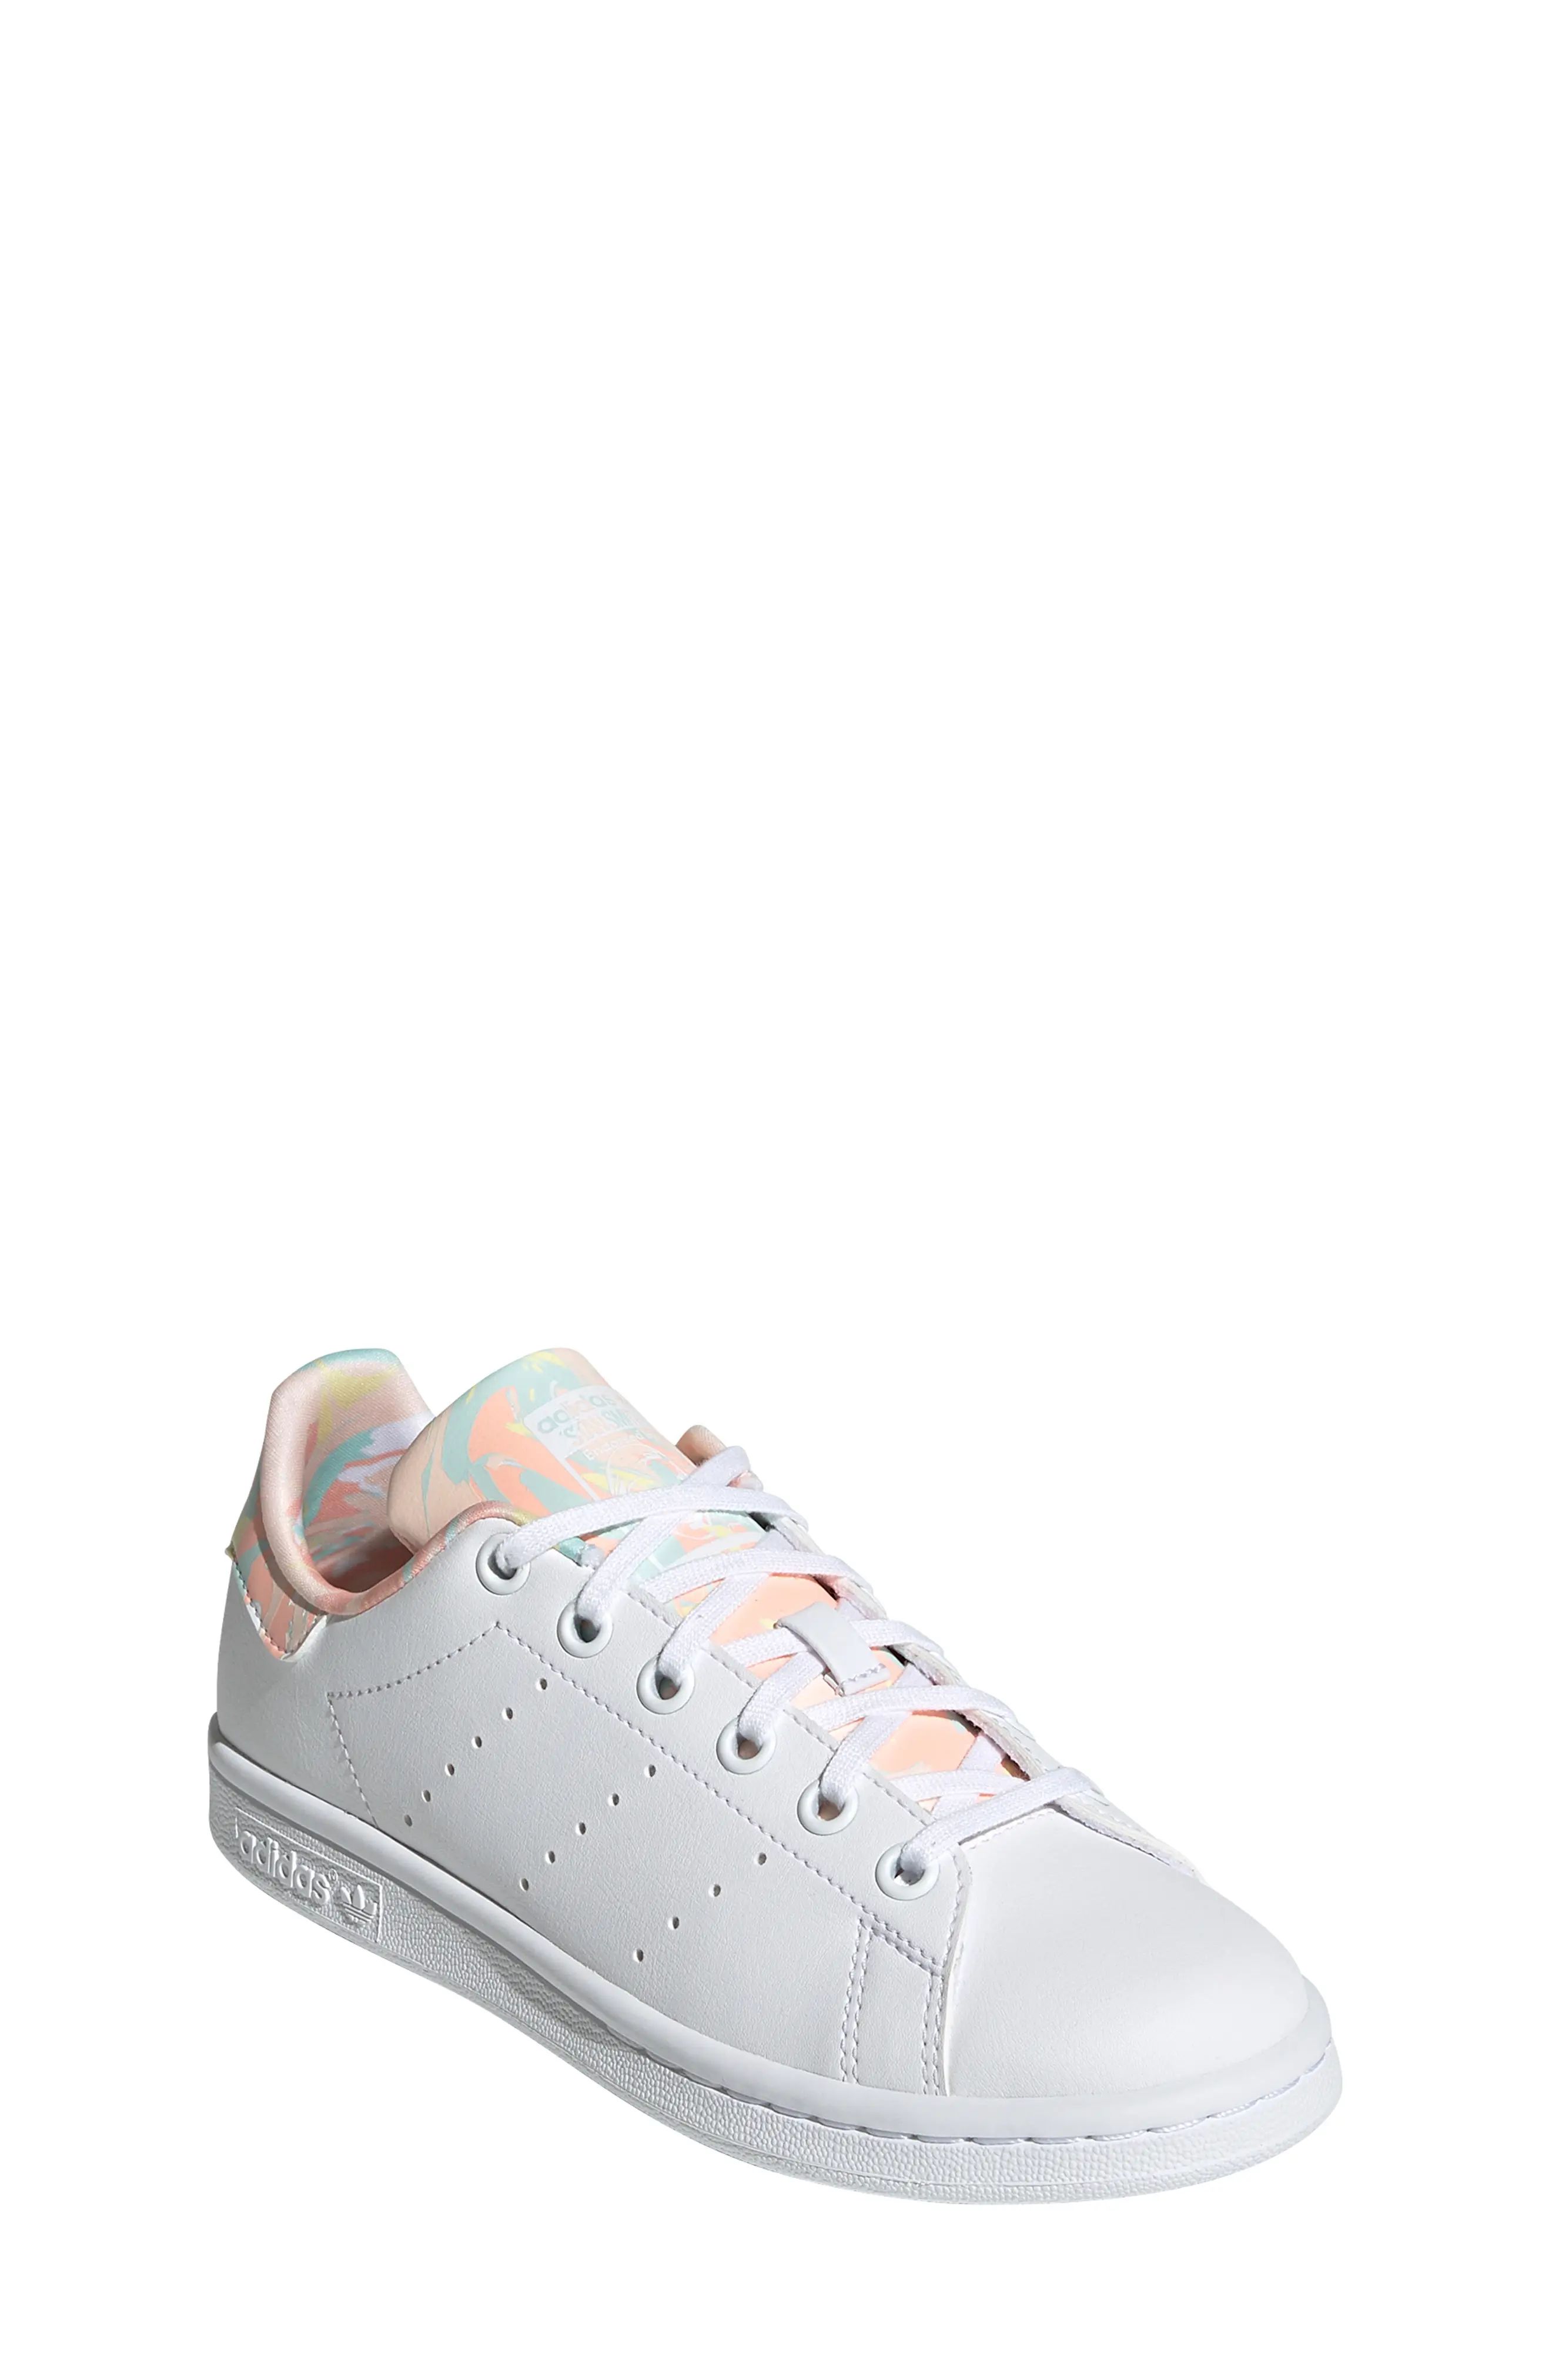 adidas Stan Smith Low Top Sneaker in White/Coral at Nordstrom, Size 6.5 M | Nordstrom